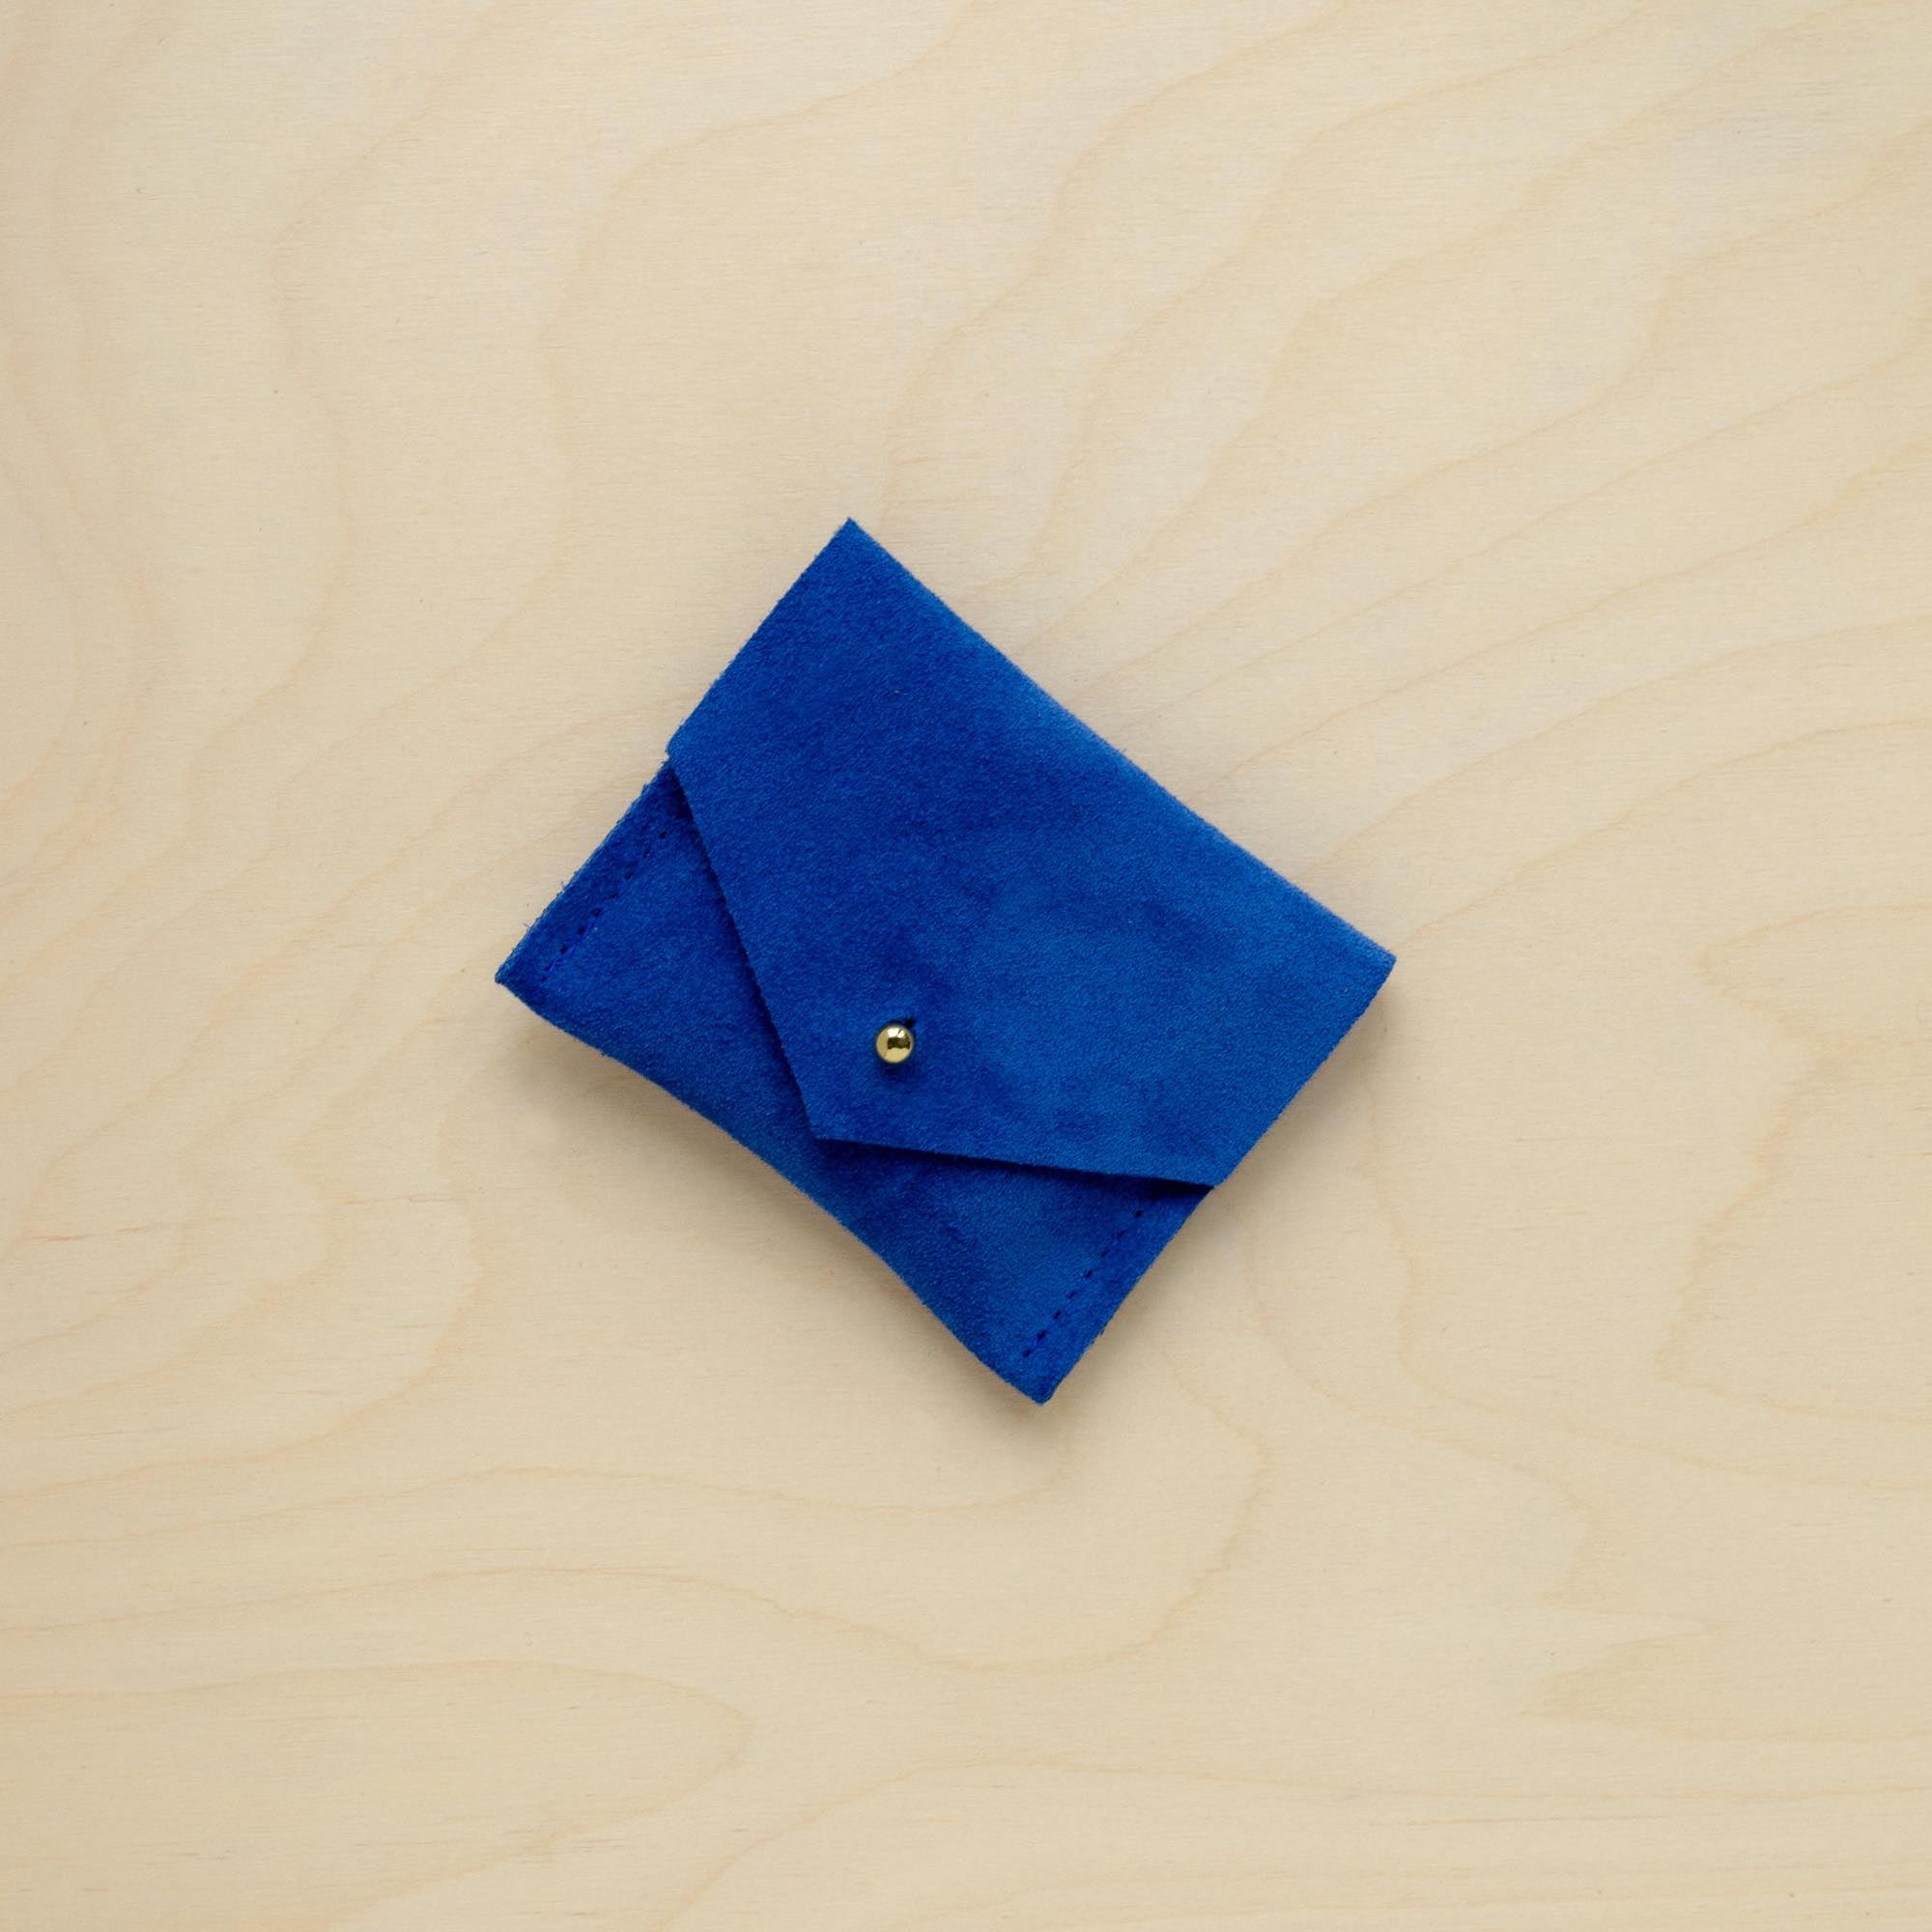 A suede Stitch Markers pouch in Ultramarine Blue. Complete with a stud for secure closing.